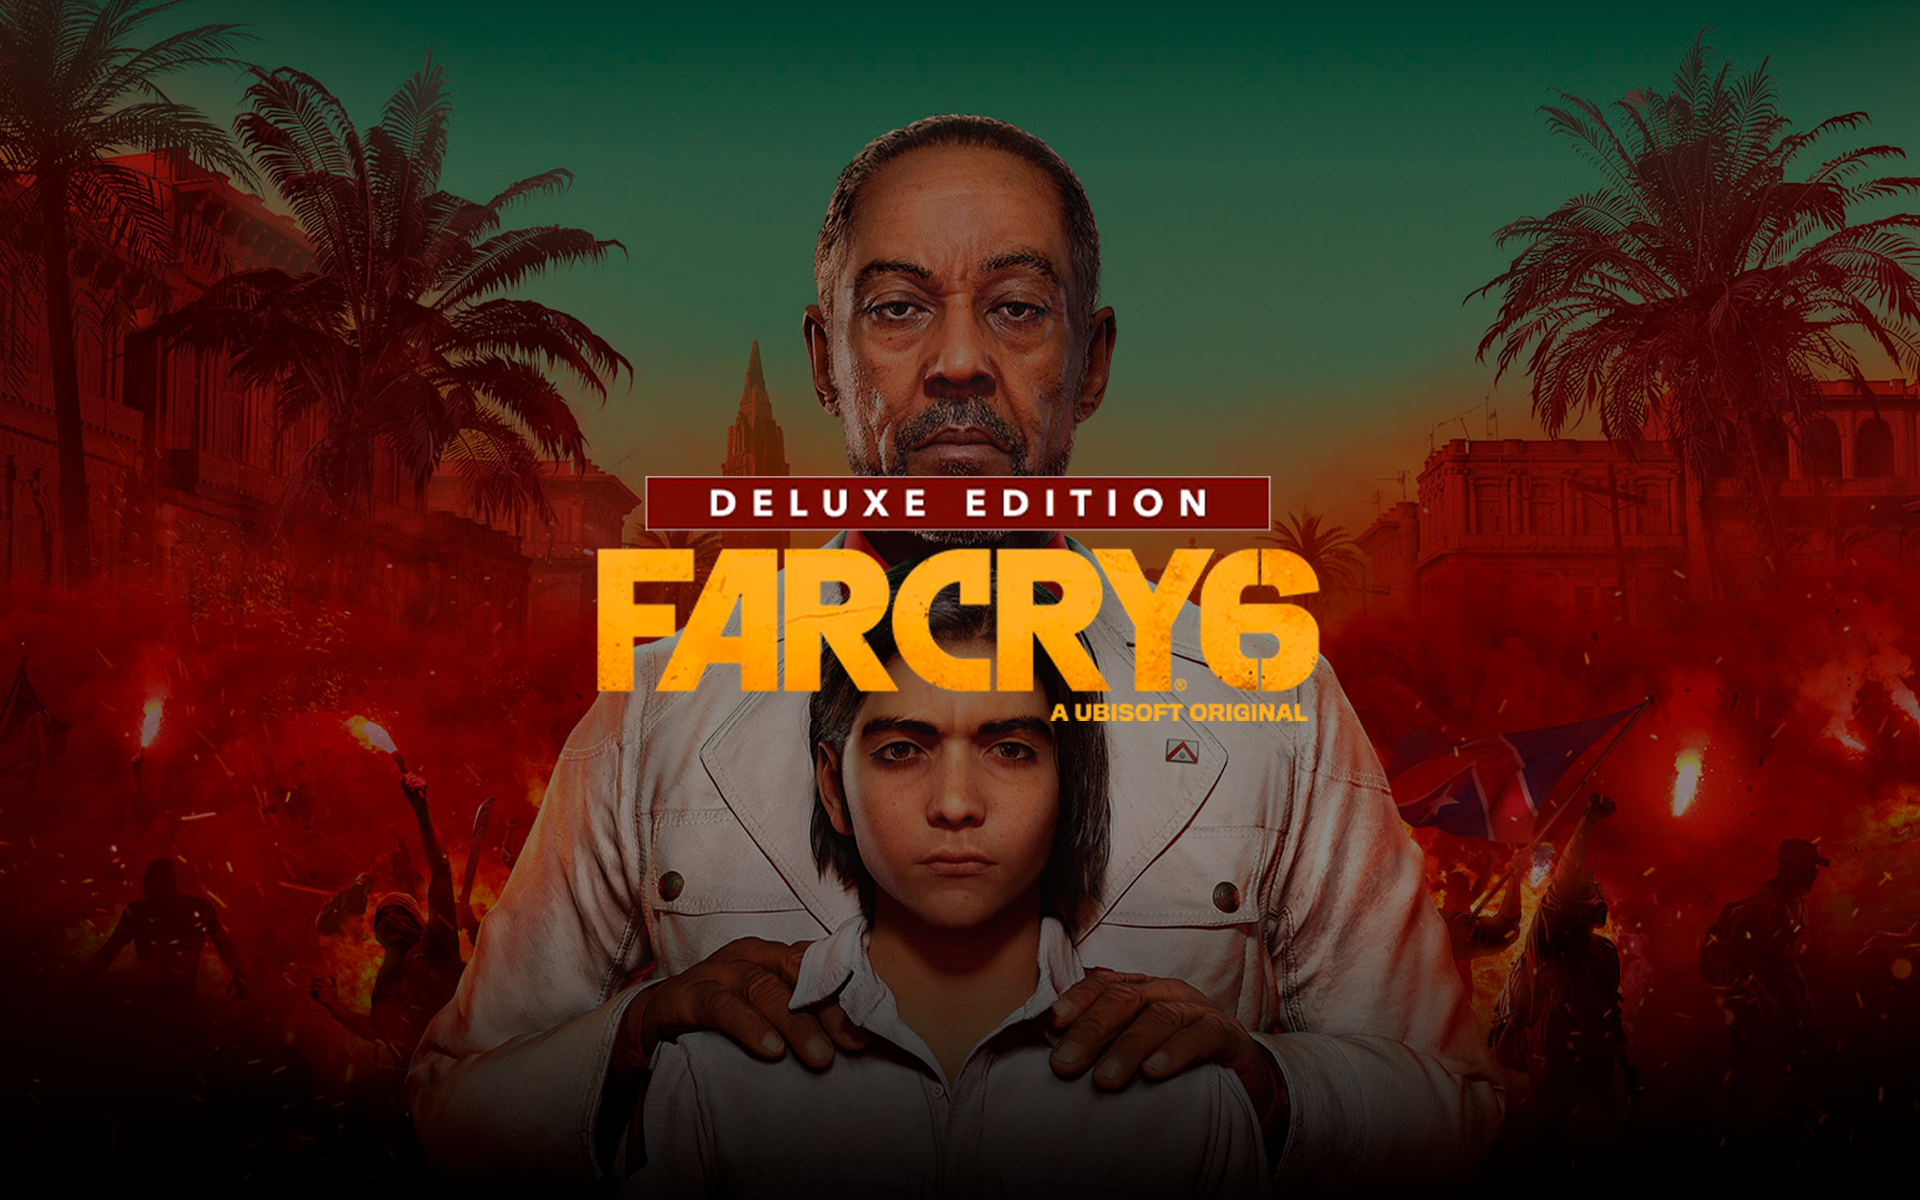 Far Cry® 6 Deluxe Edition